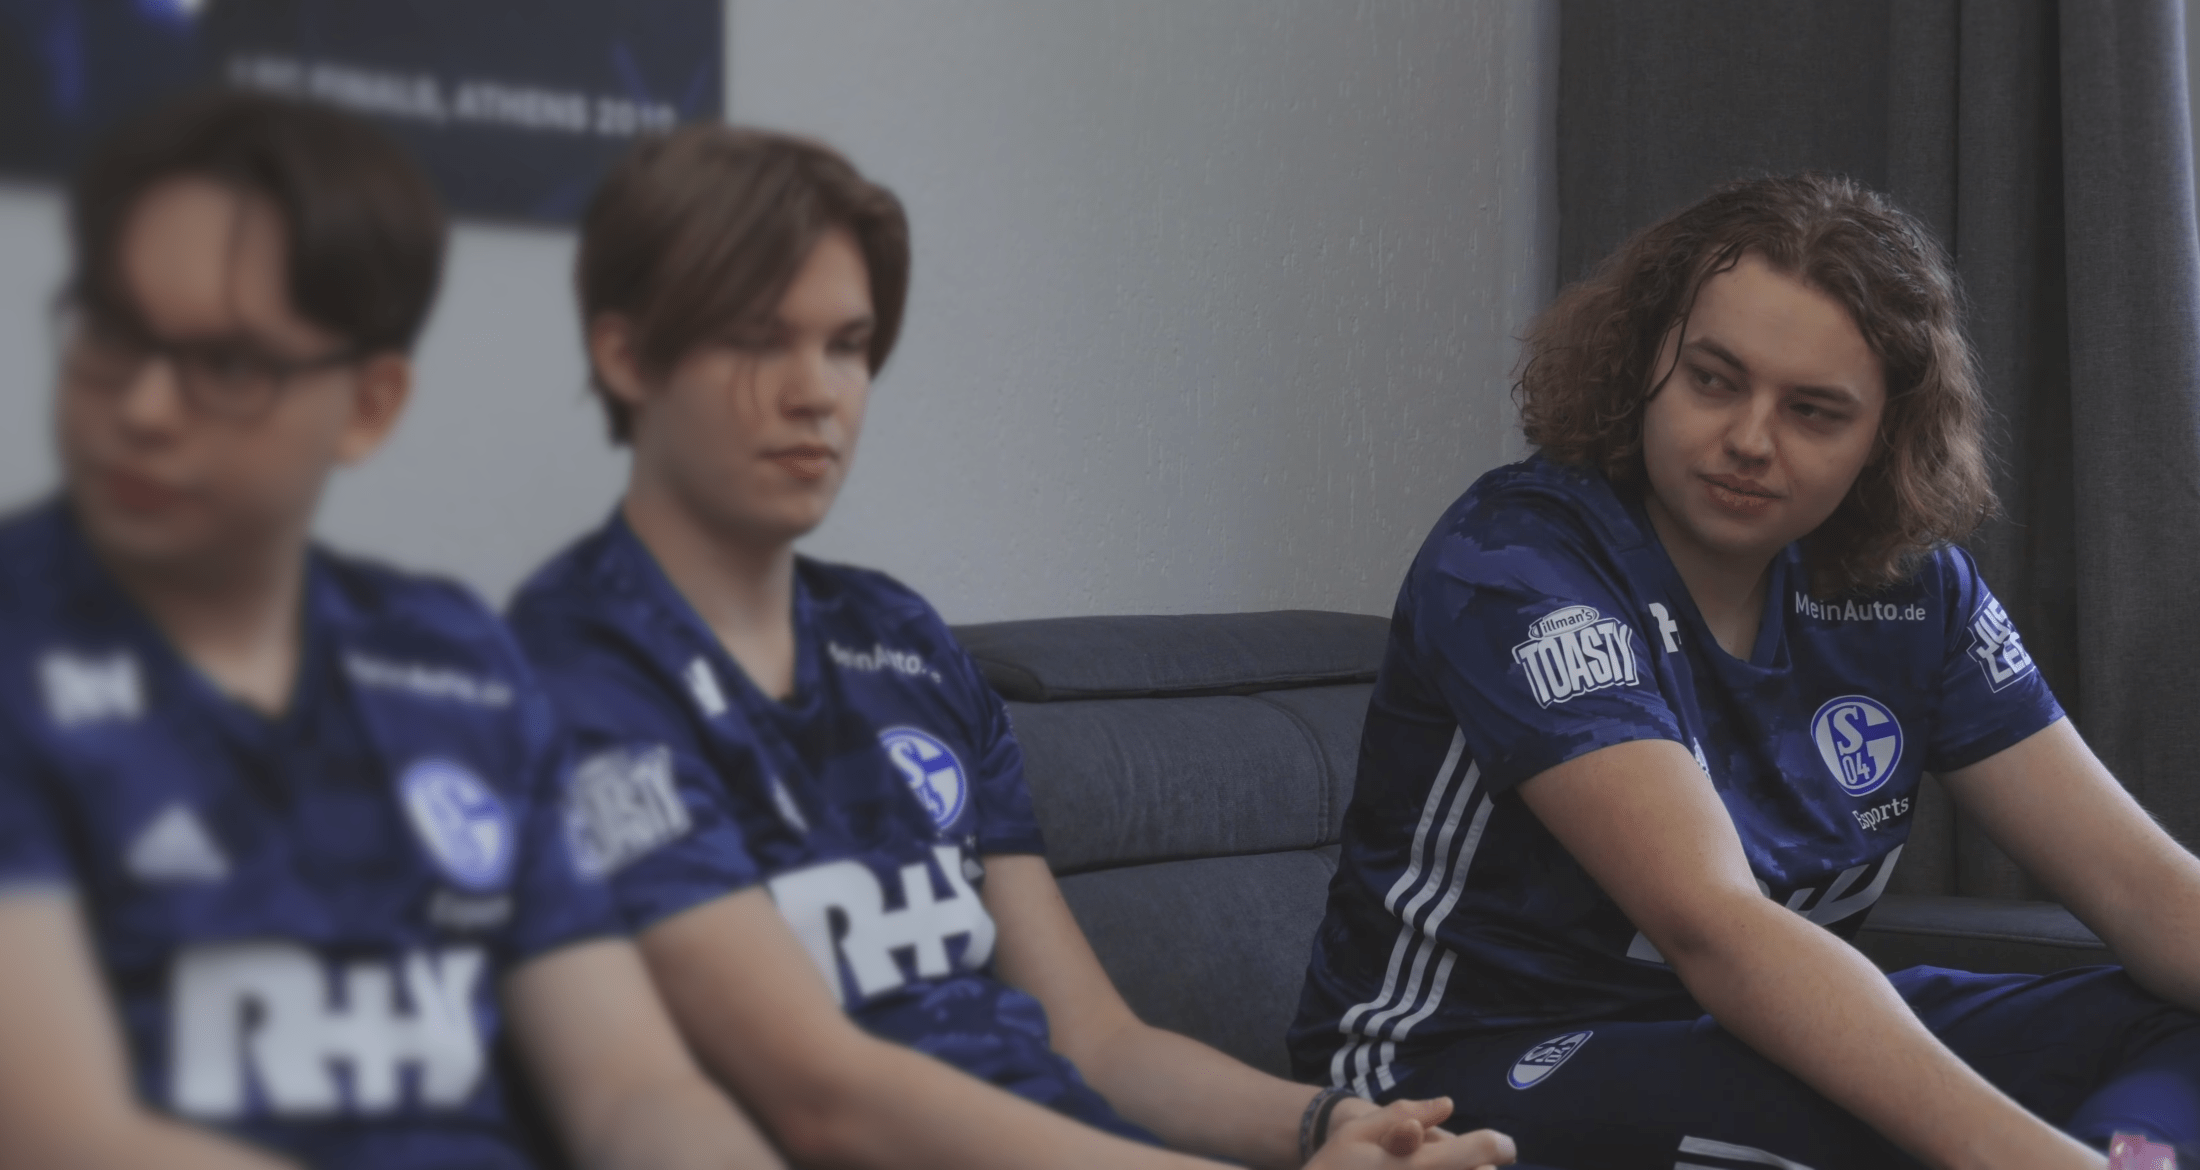 Seal, previously competed for Schalke 04 Esports.